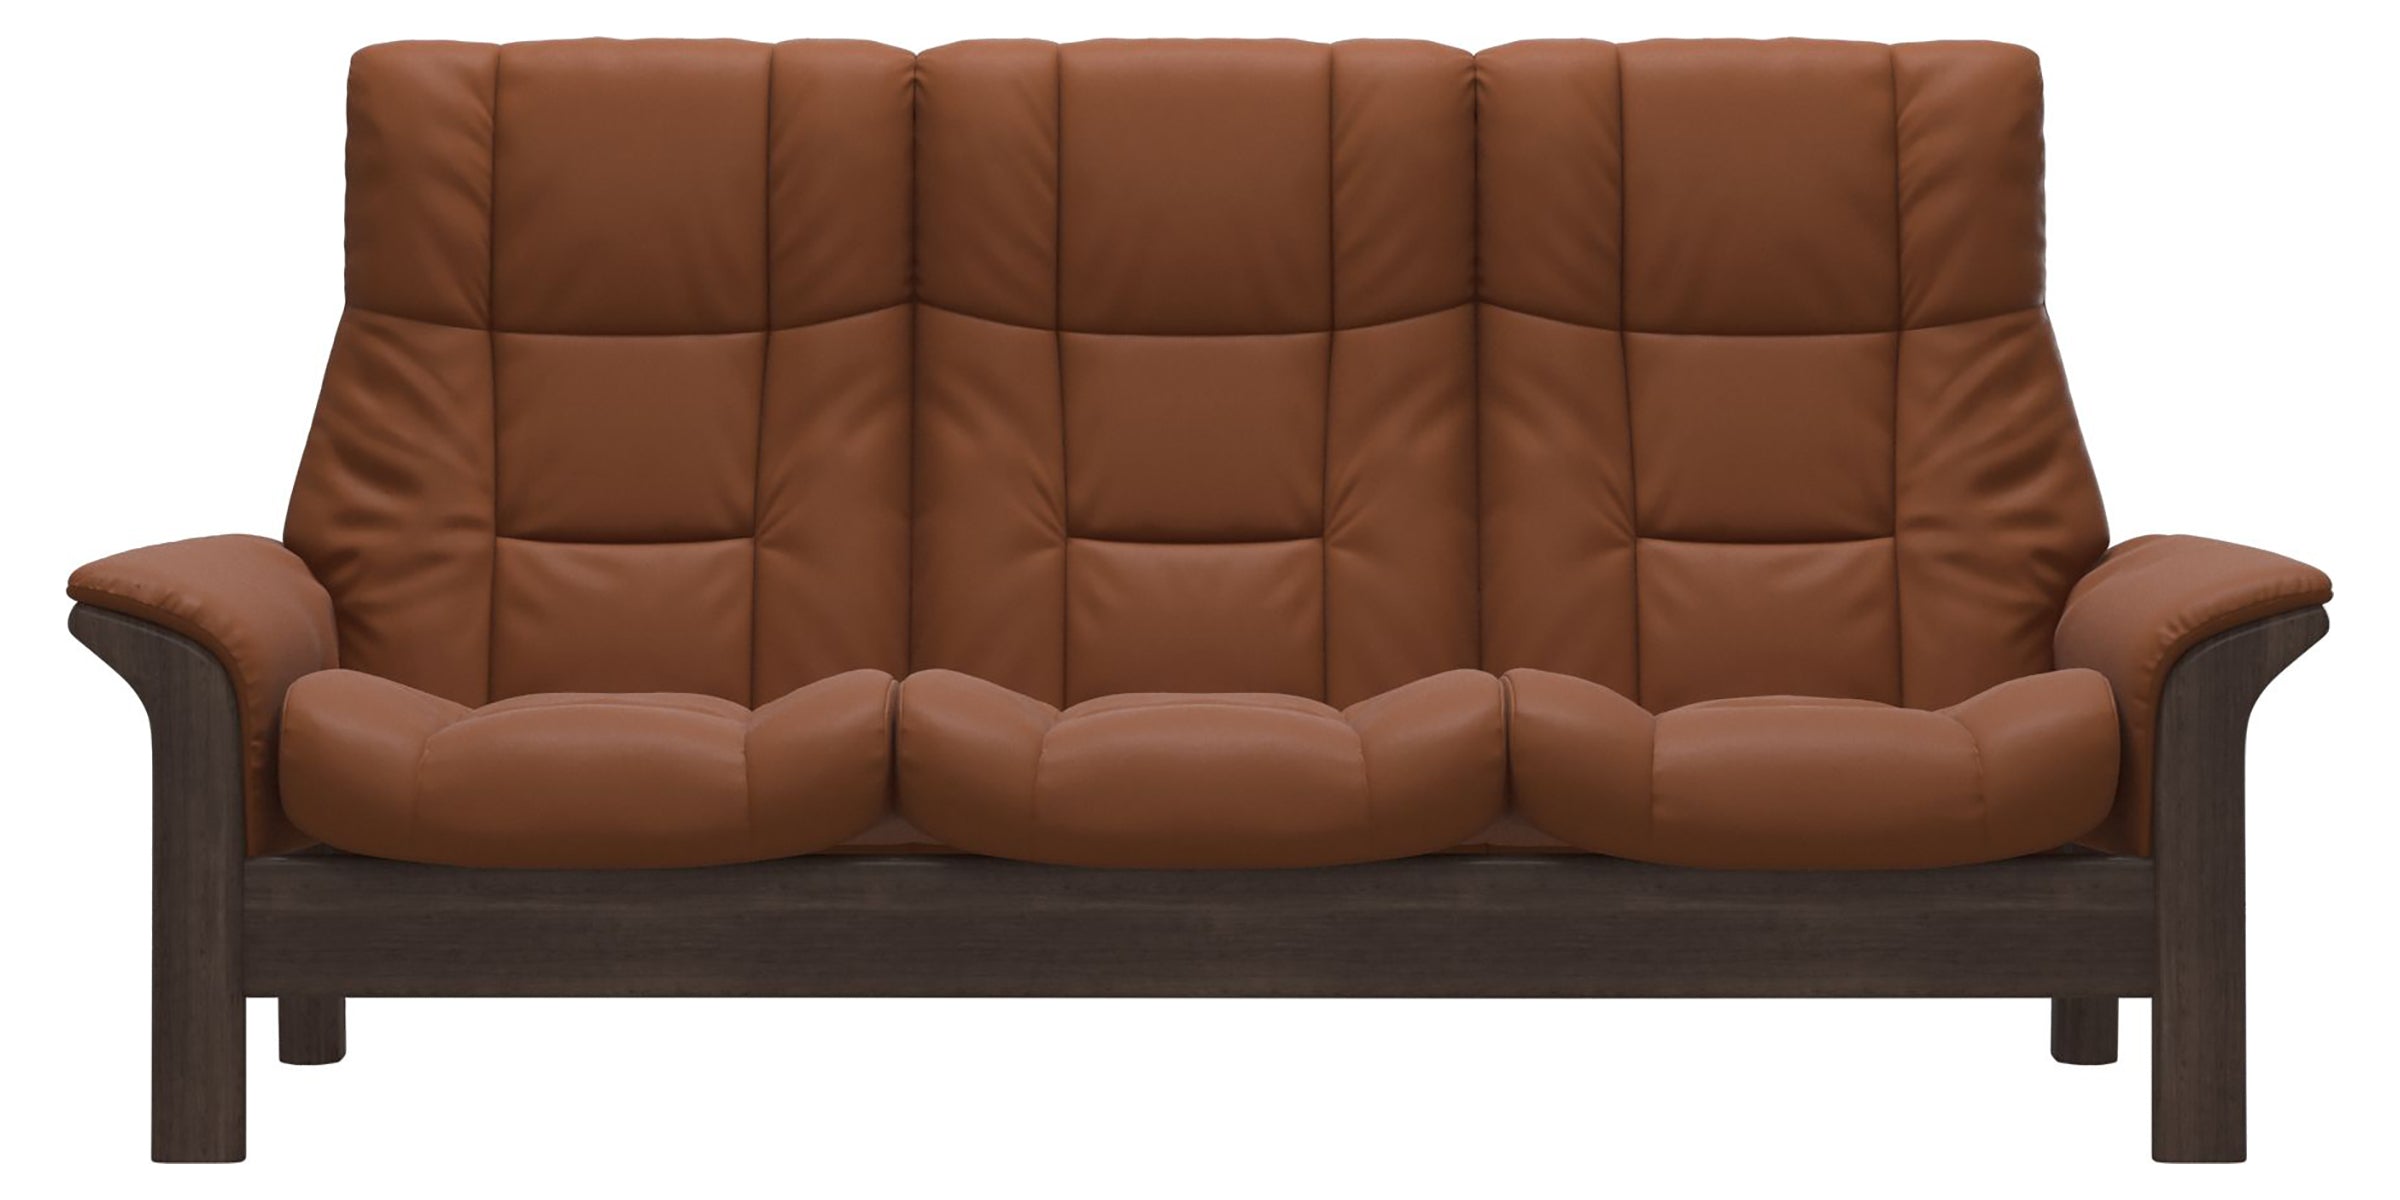 Paloma Leather New Cognac and Wenge Base | Stressless Windsor 3-Seater High Back Sofa | Valley Ridge Furniture